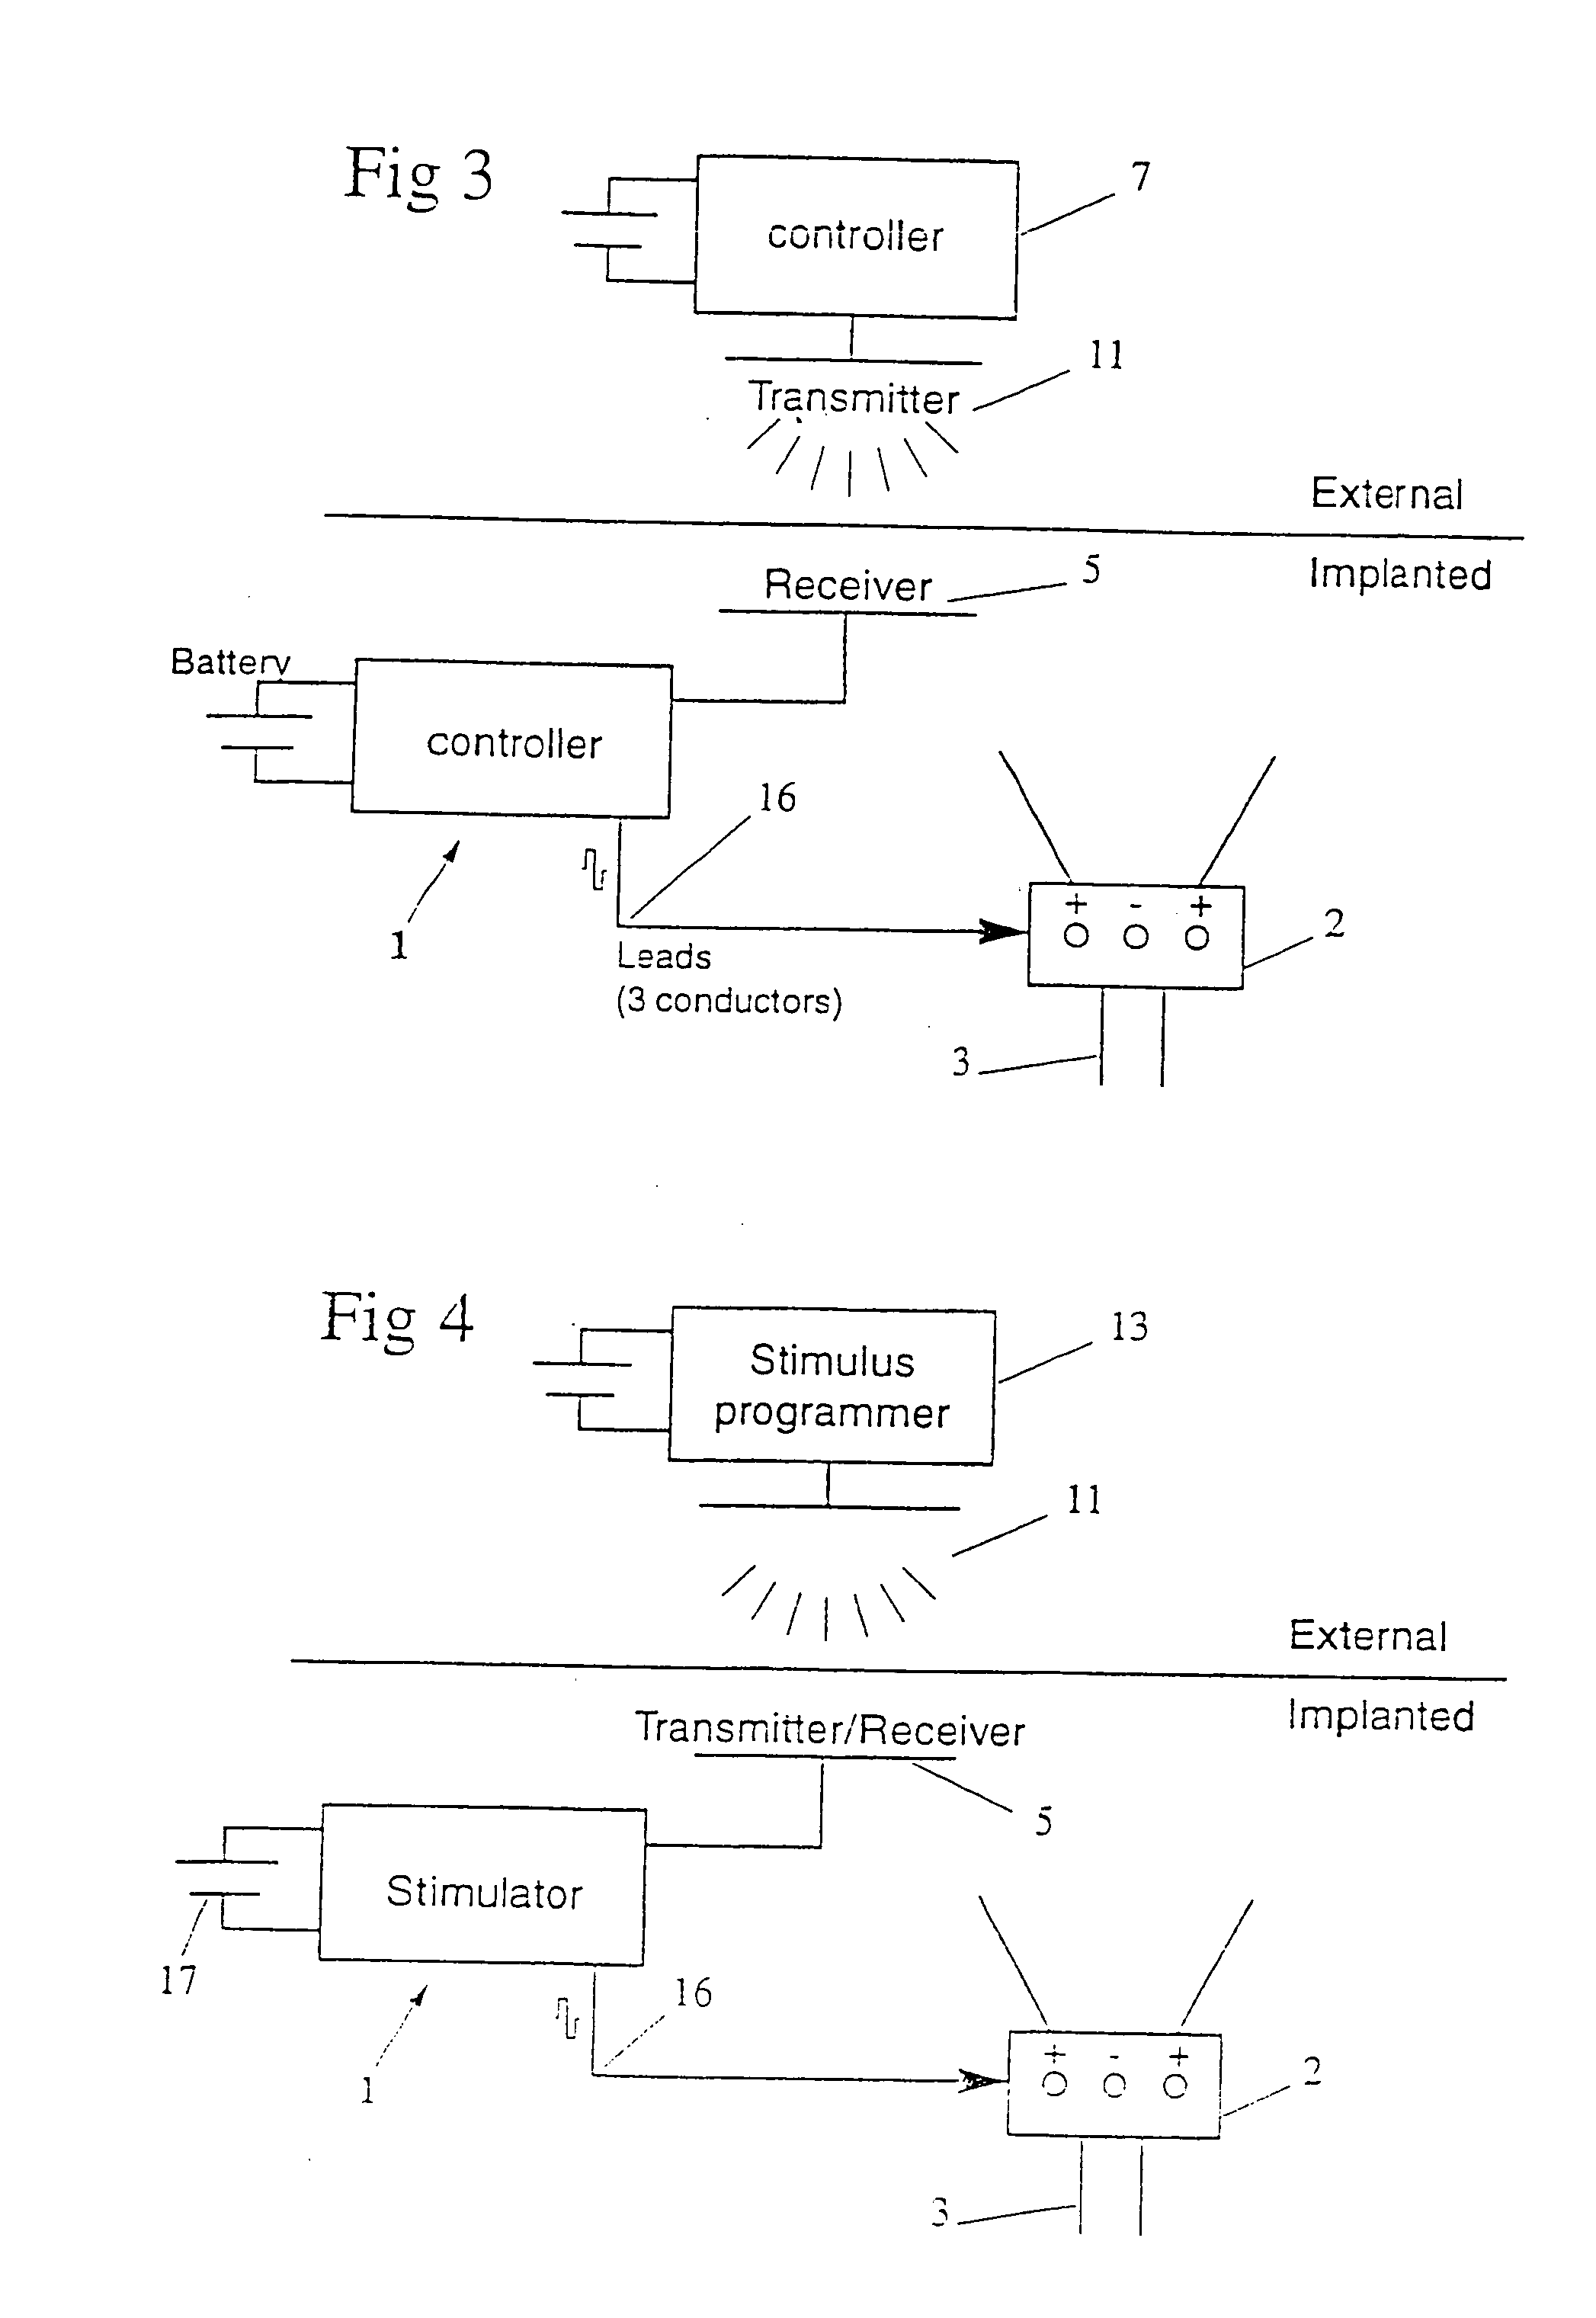 Method and apparatus for treating incontinence